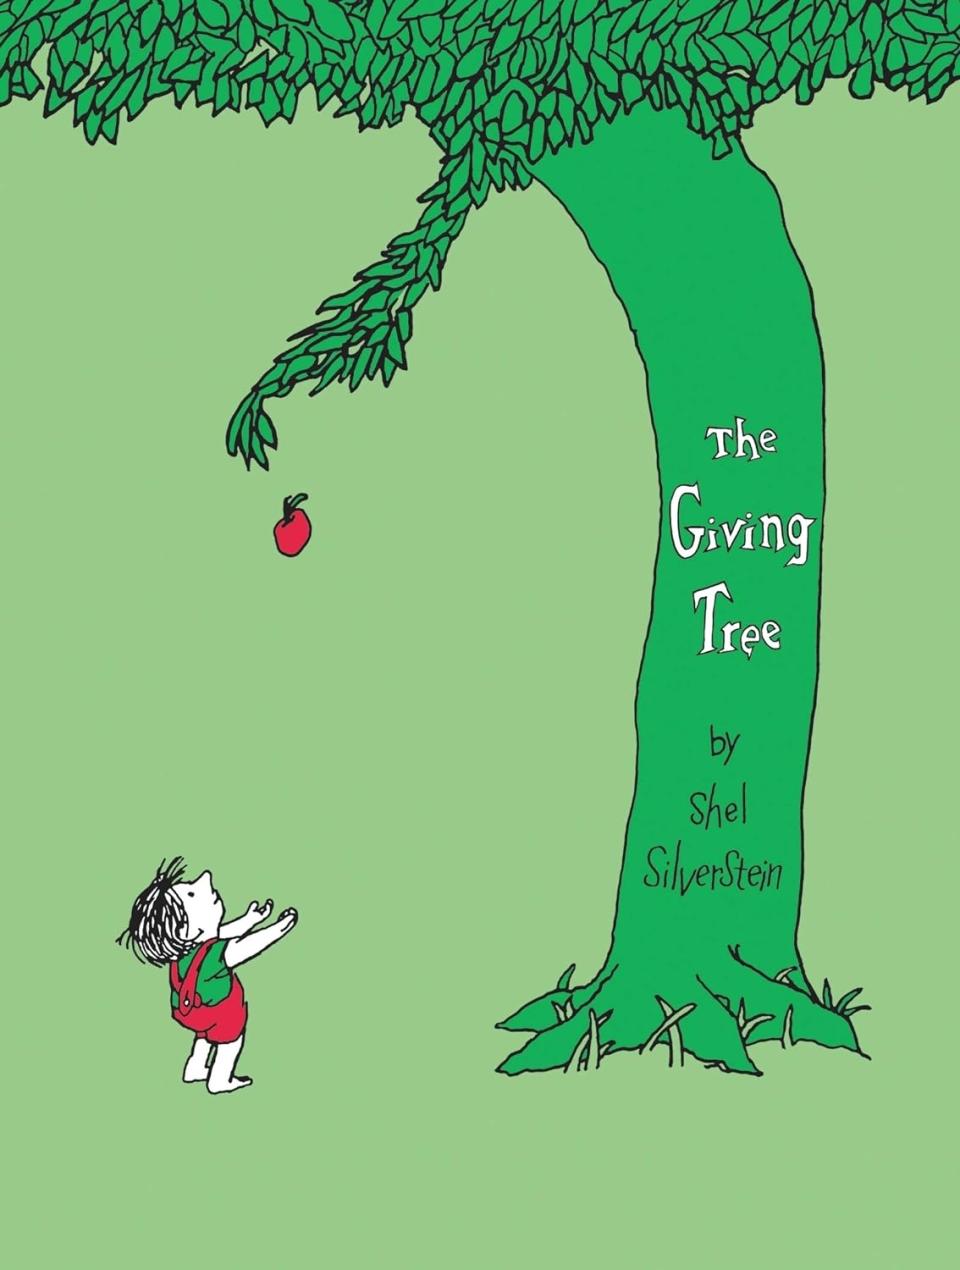 Cover of "The Giving Tree" by Shel Silverstein, showing a child reaching for an apple on a tree